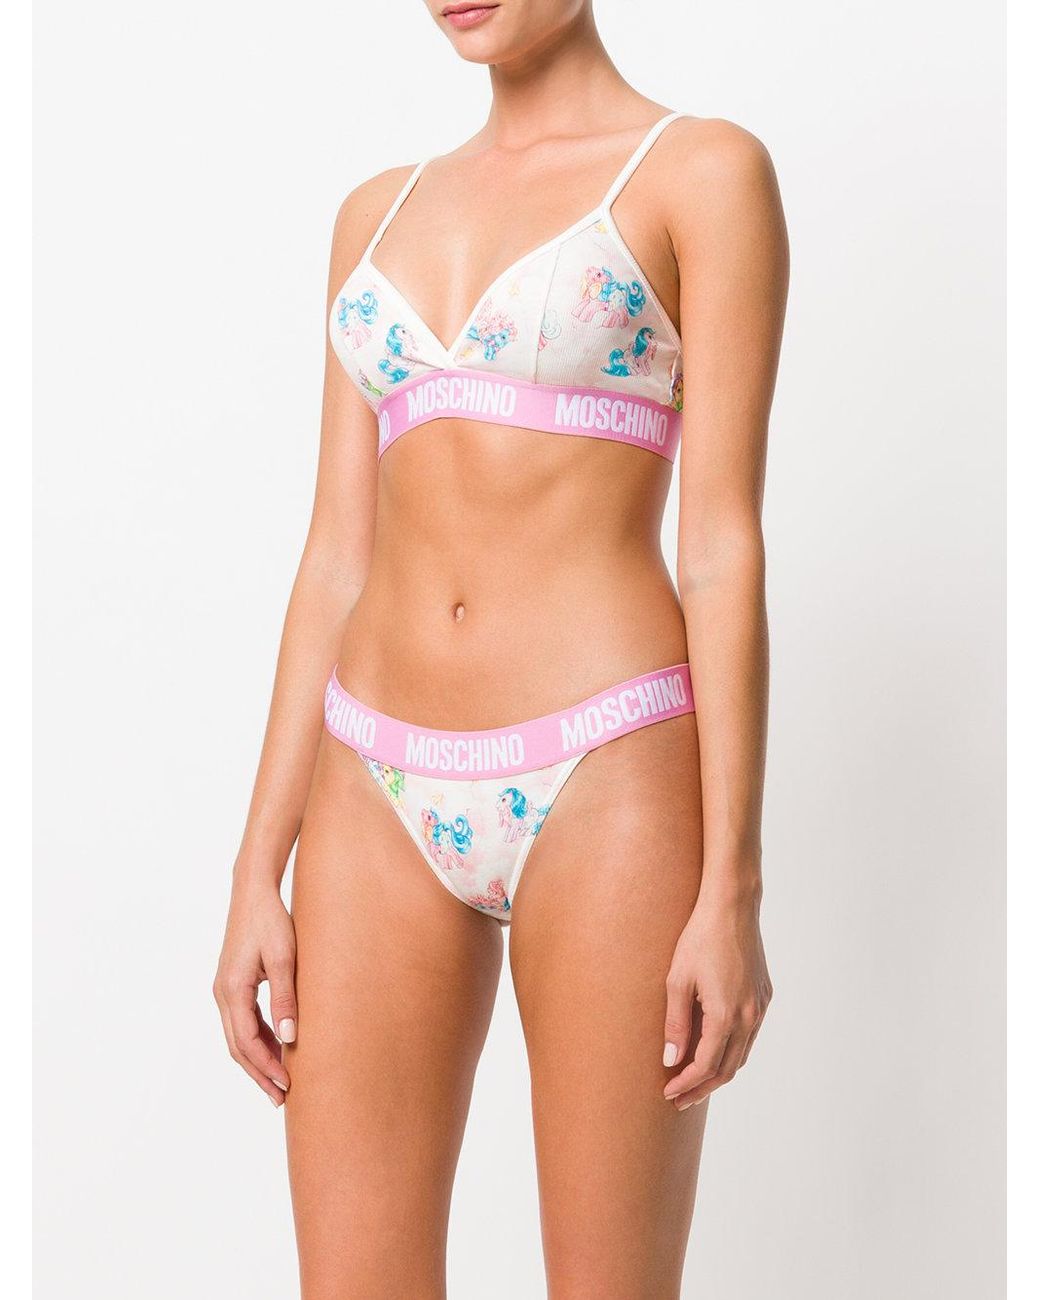 Moschino My Little Pony Two Piece Set in Pink